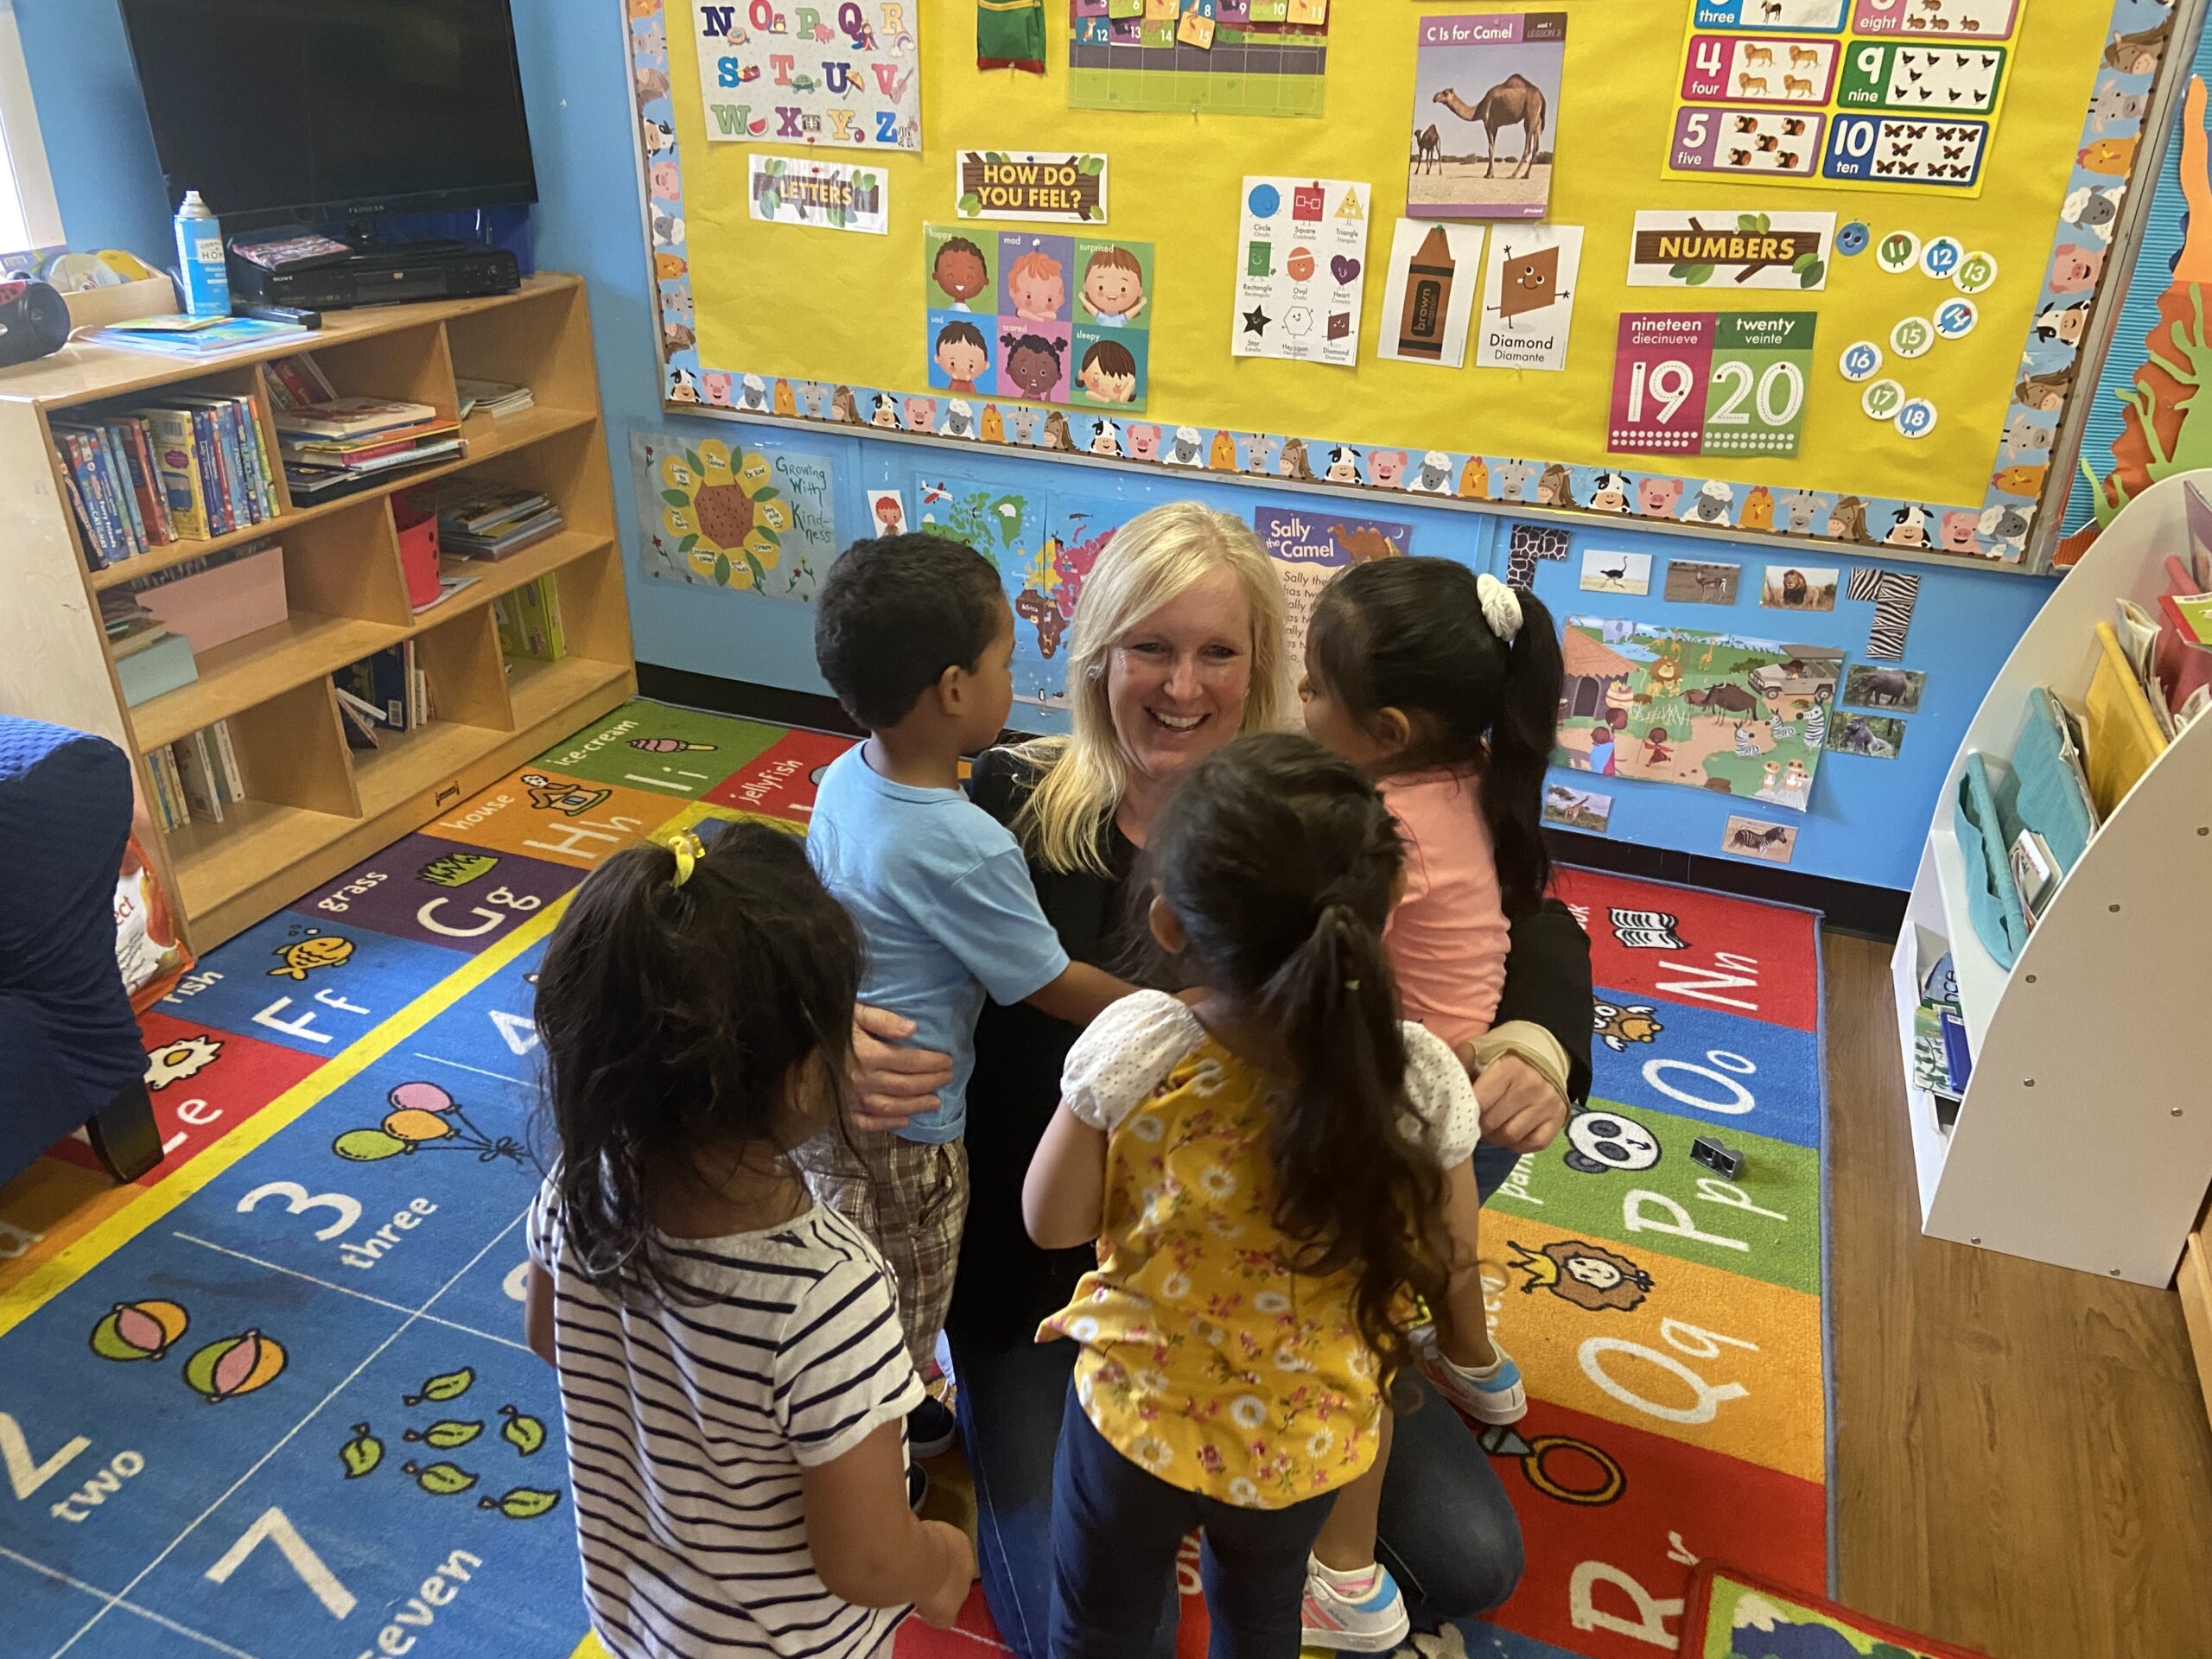 BY JULIA HEMING Southampton Day Care Center president Susan Hovdesven with the preschool class.